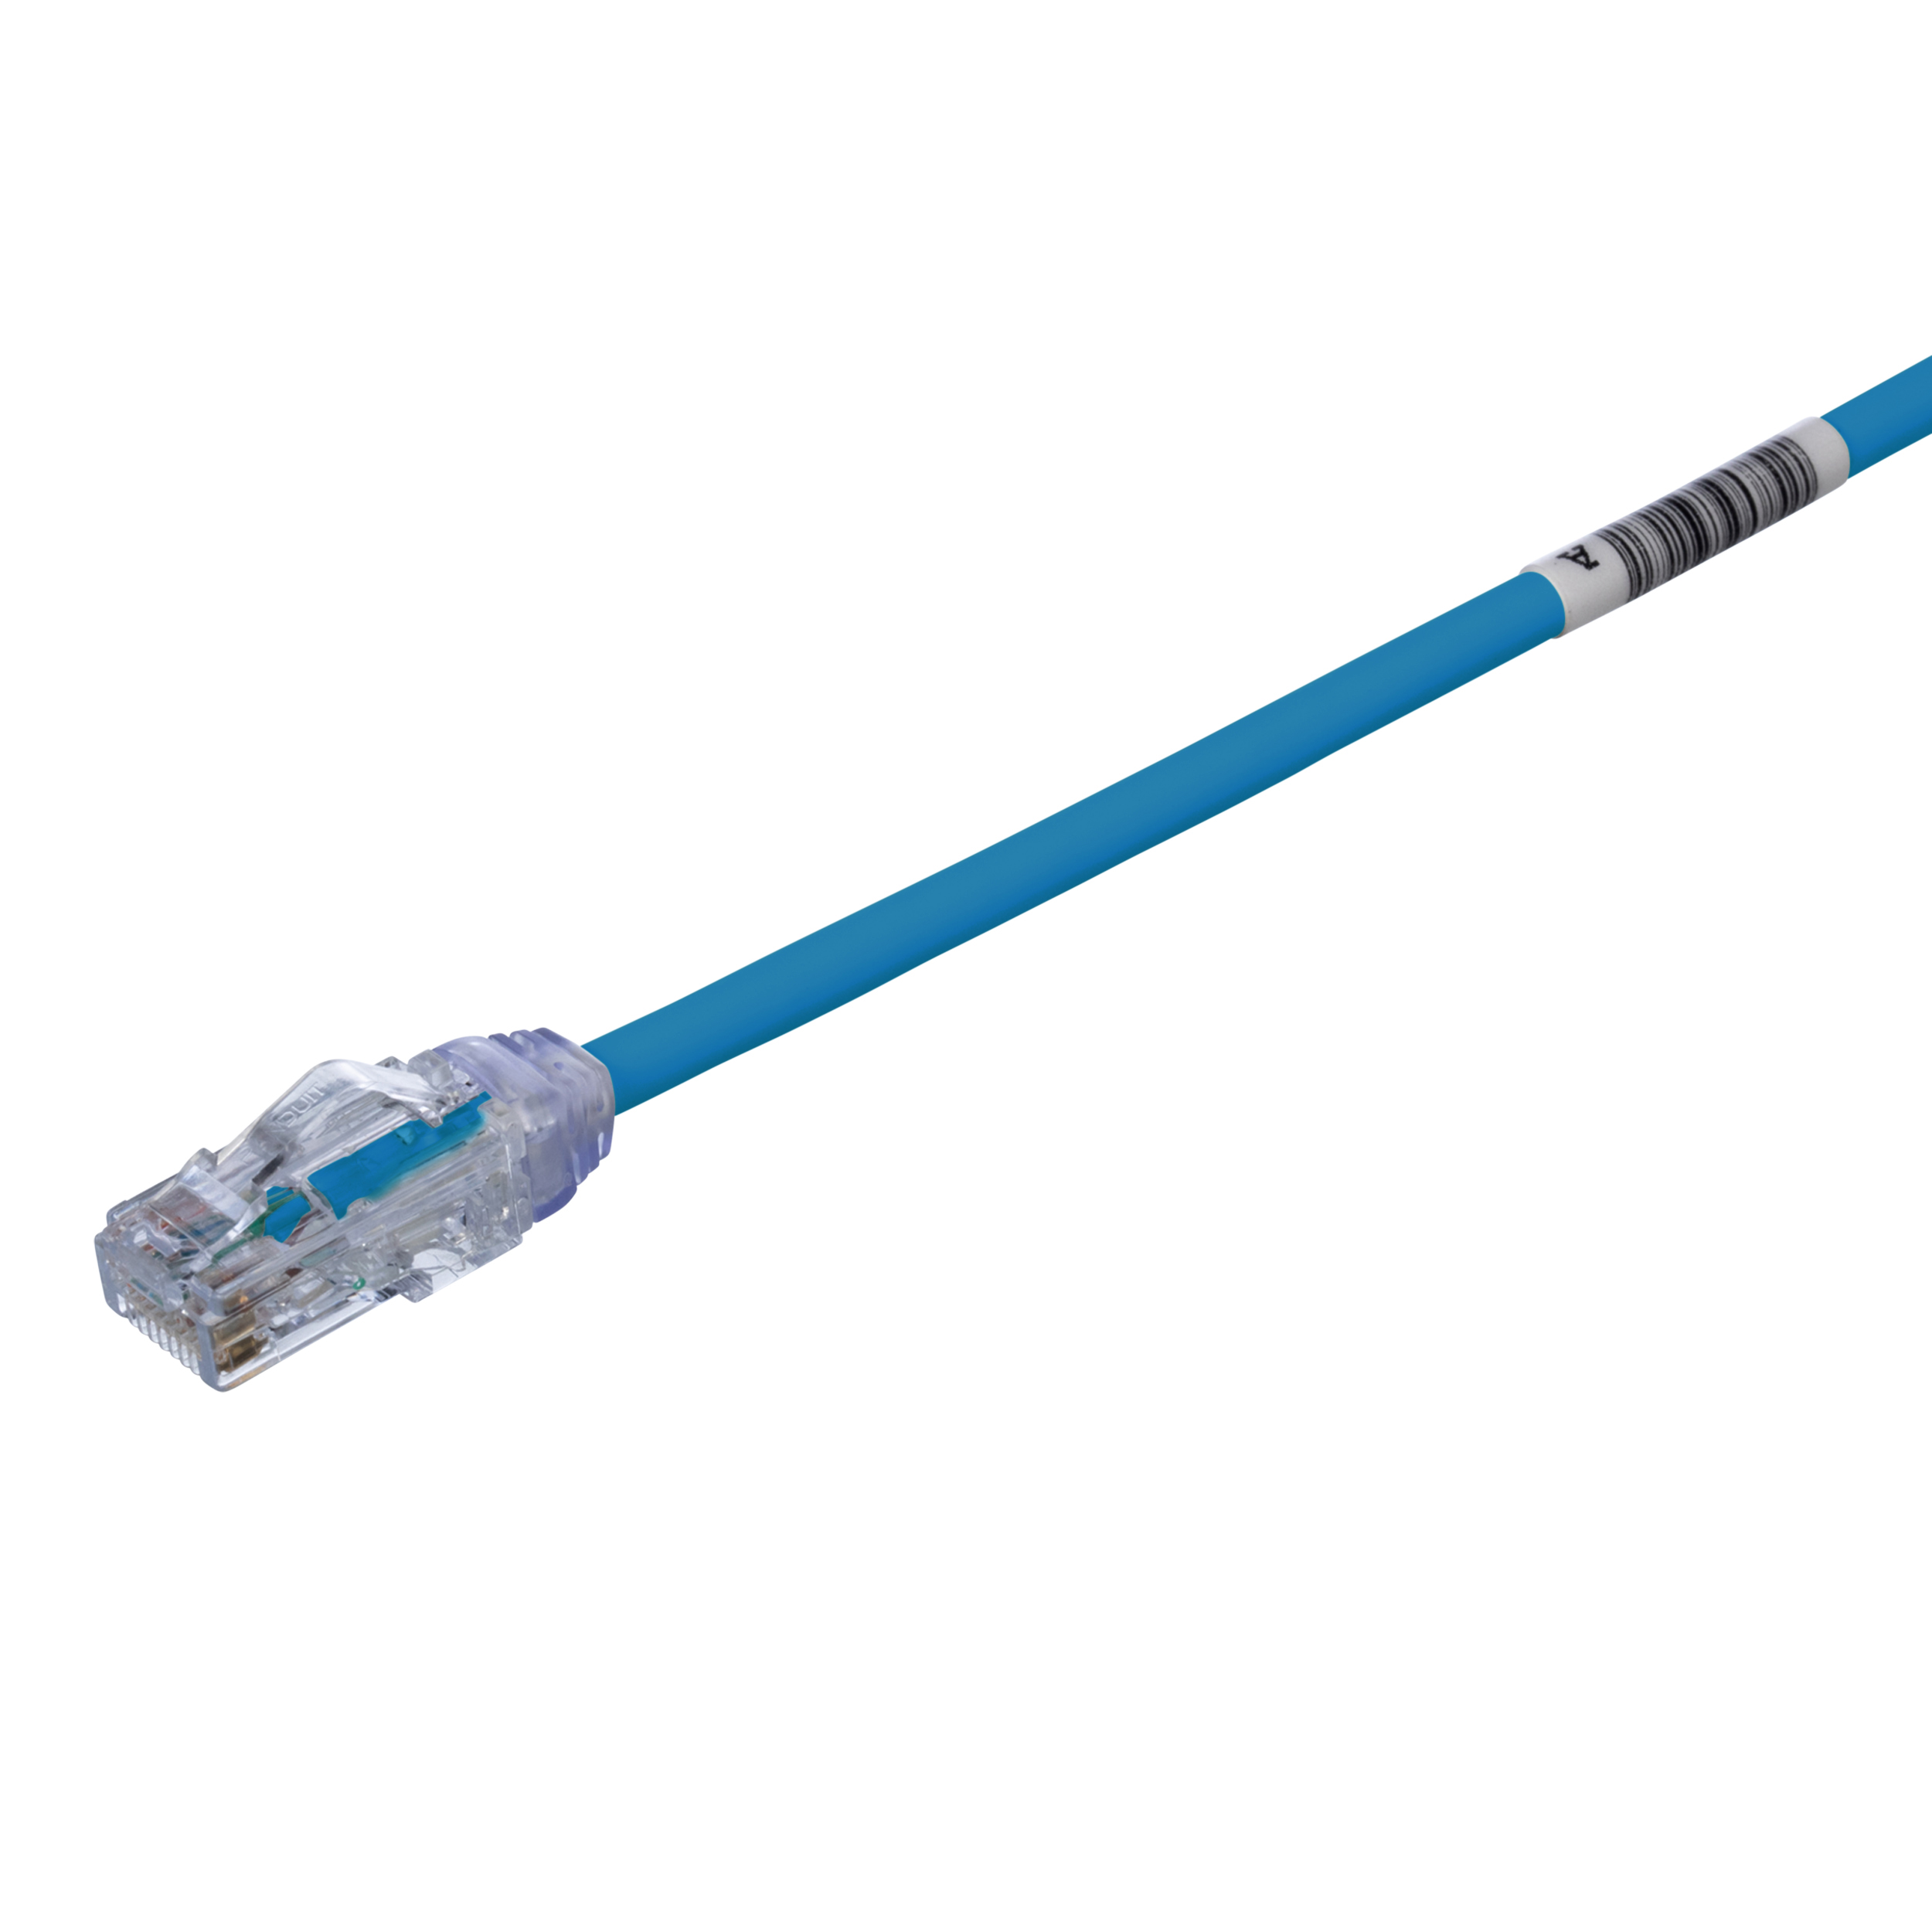 Cat 6A 28 AWG UTP Copper Patch Cord, 4 ft, Blue